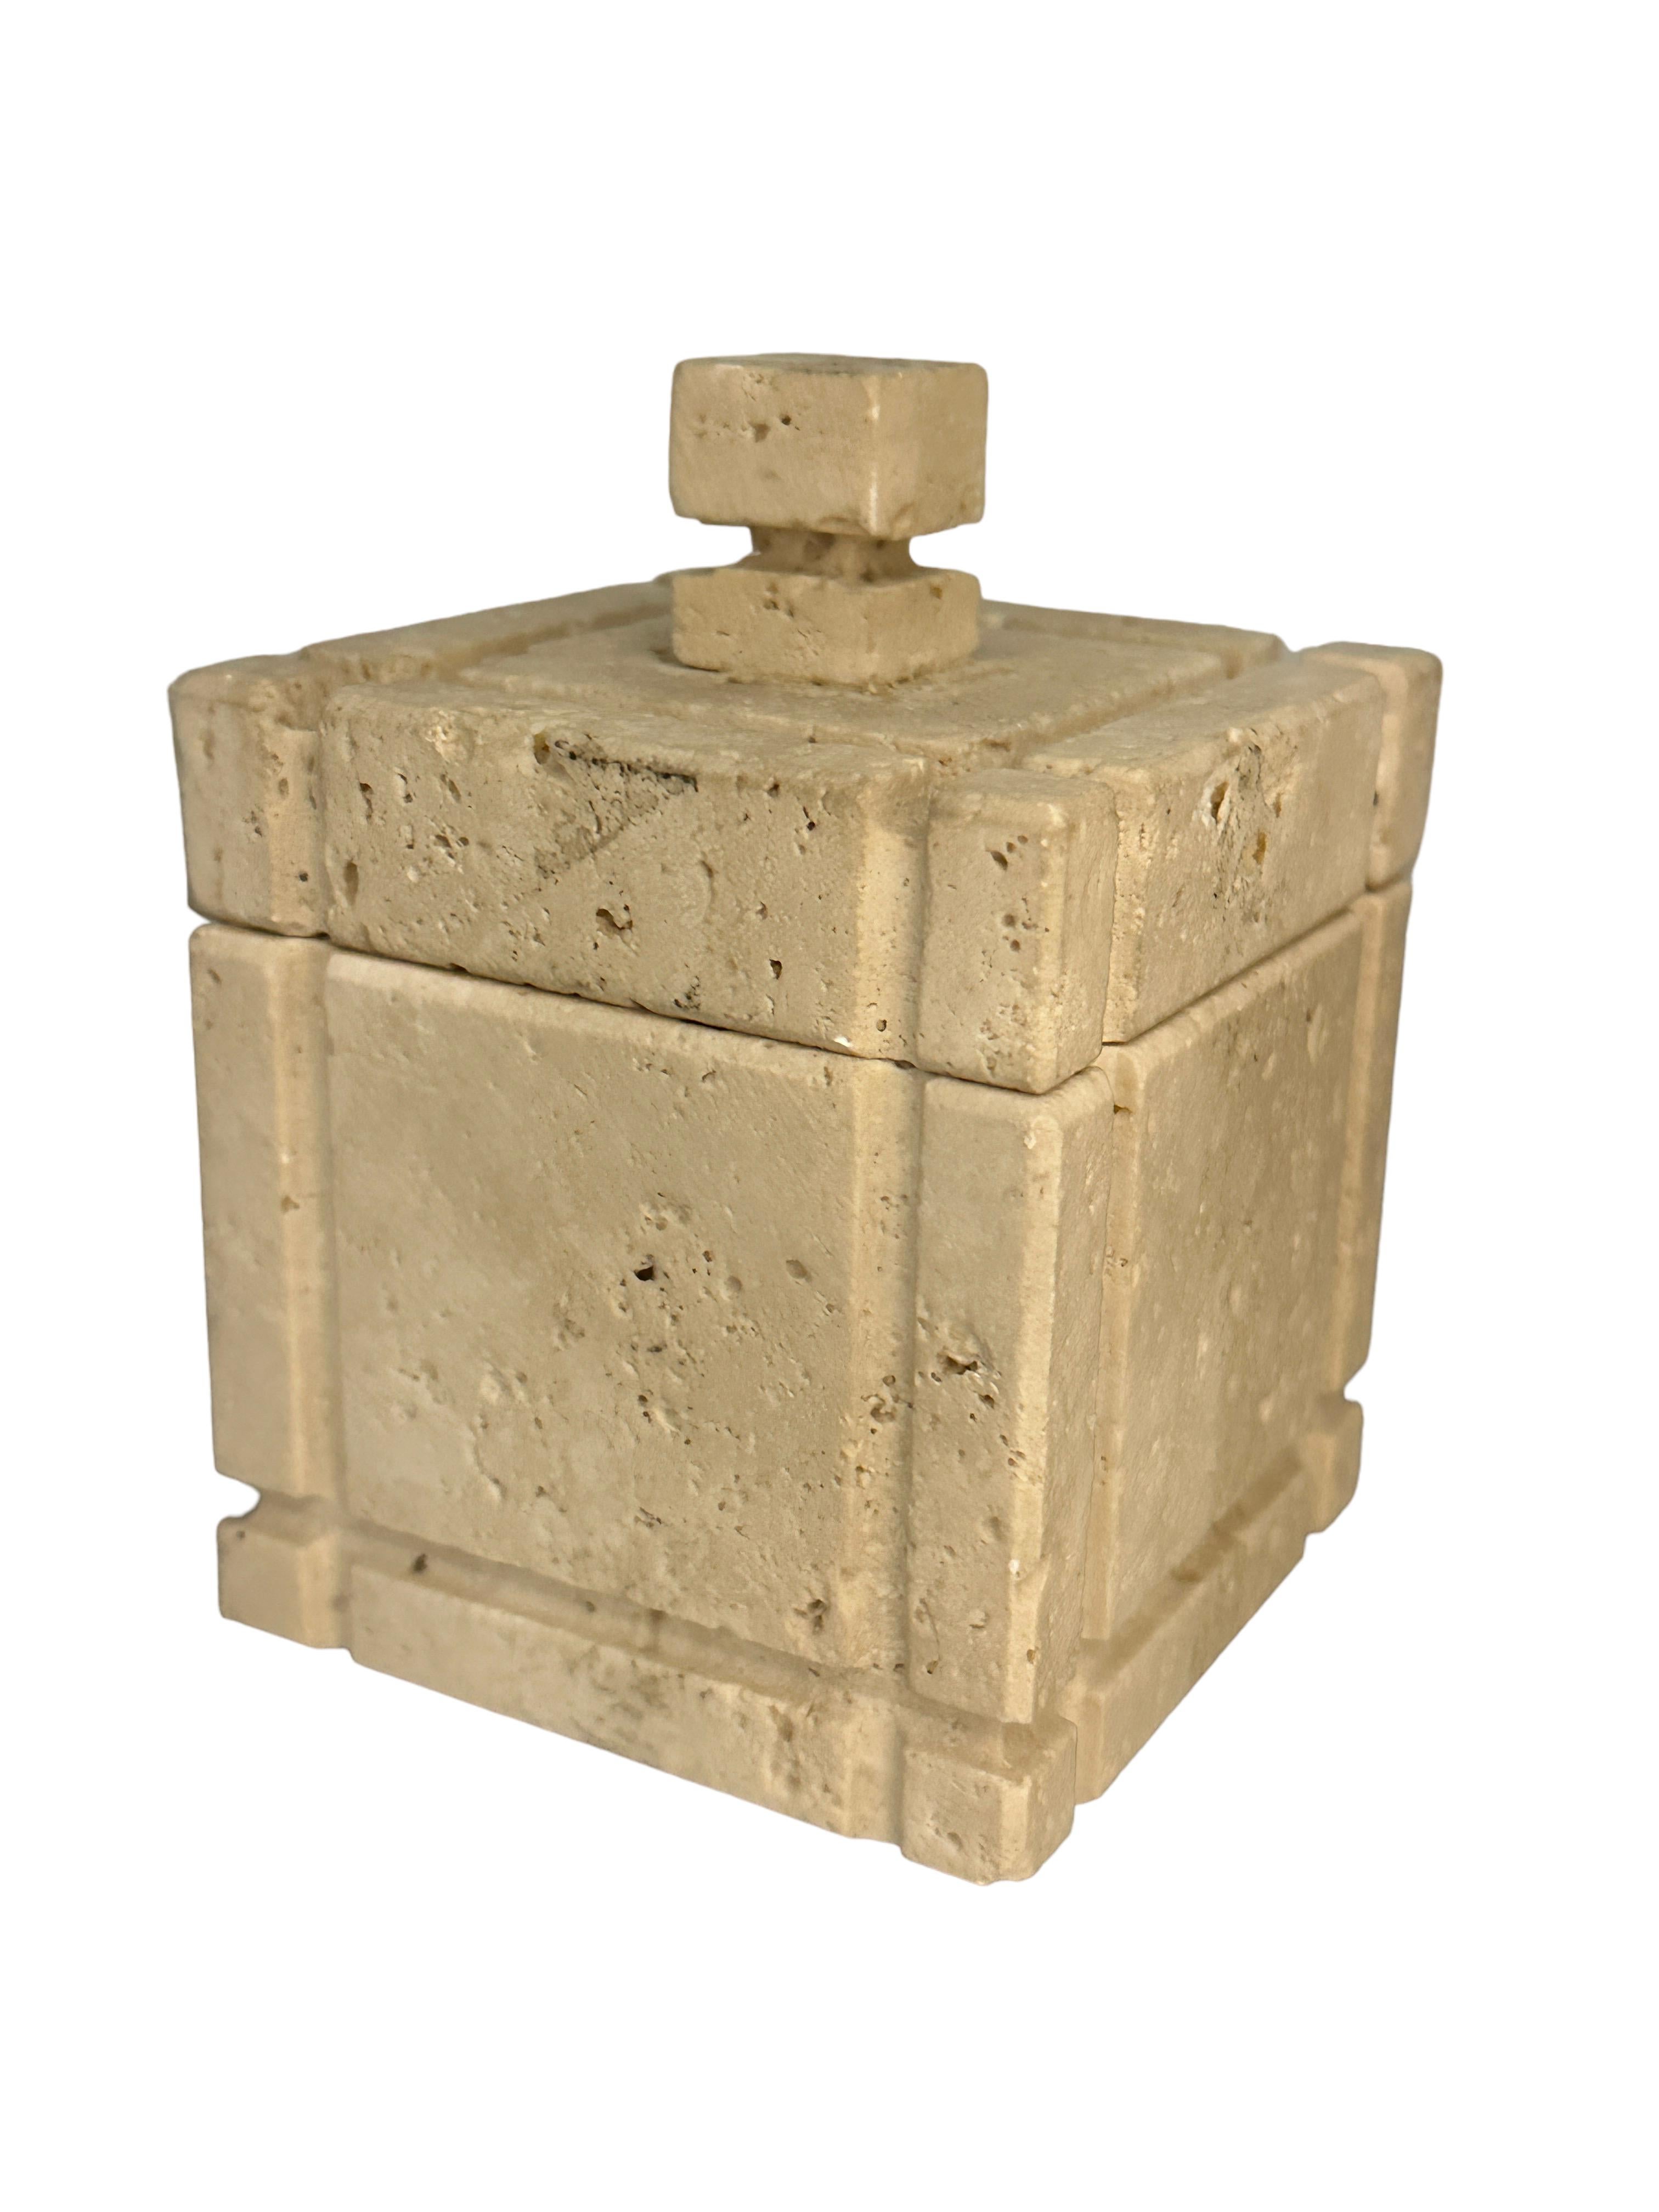 Brutalist Midcentury Travertine Marble Italian Box Catchall by Fratelli Manelli, 1970s For Sale